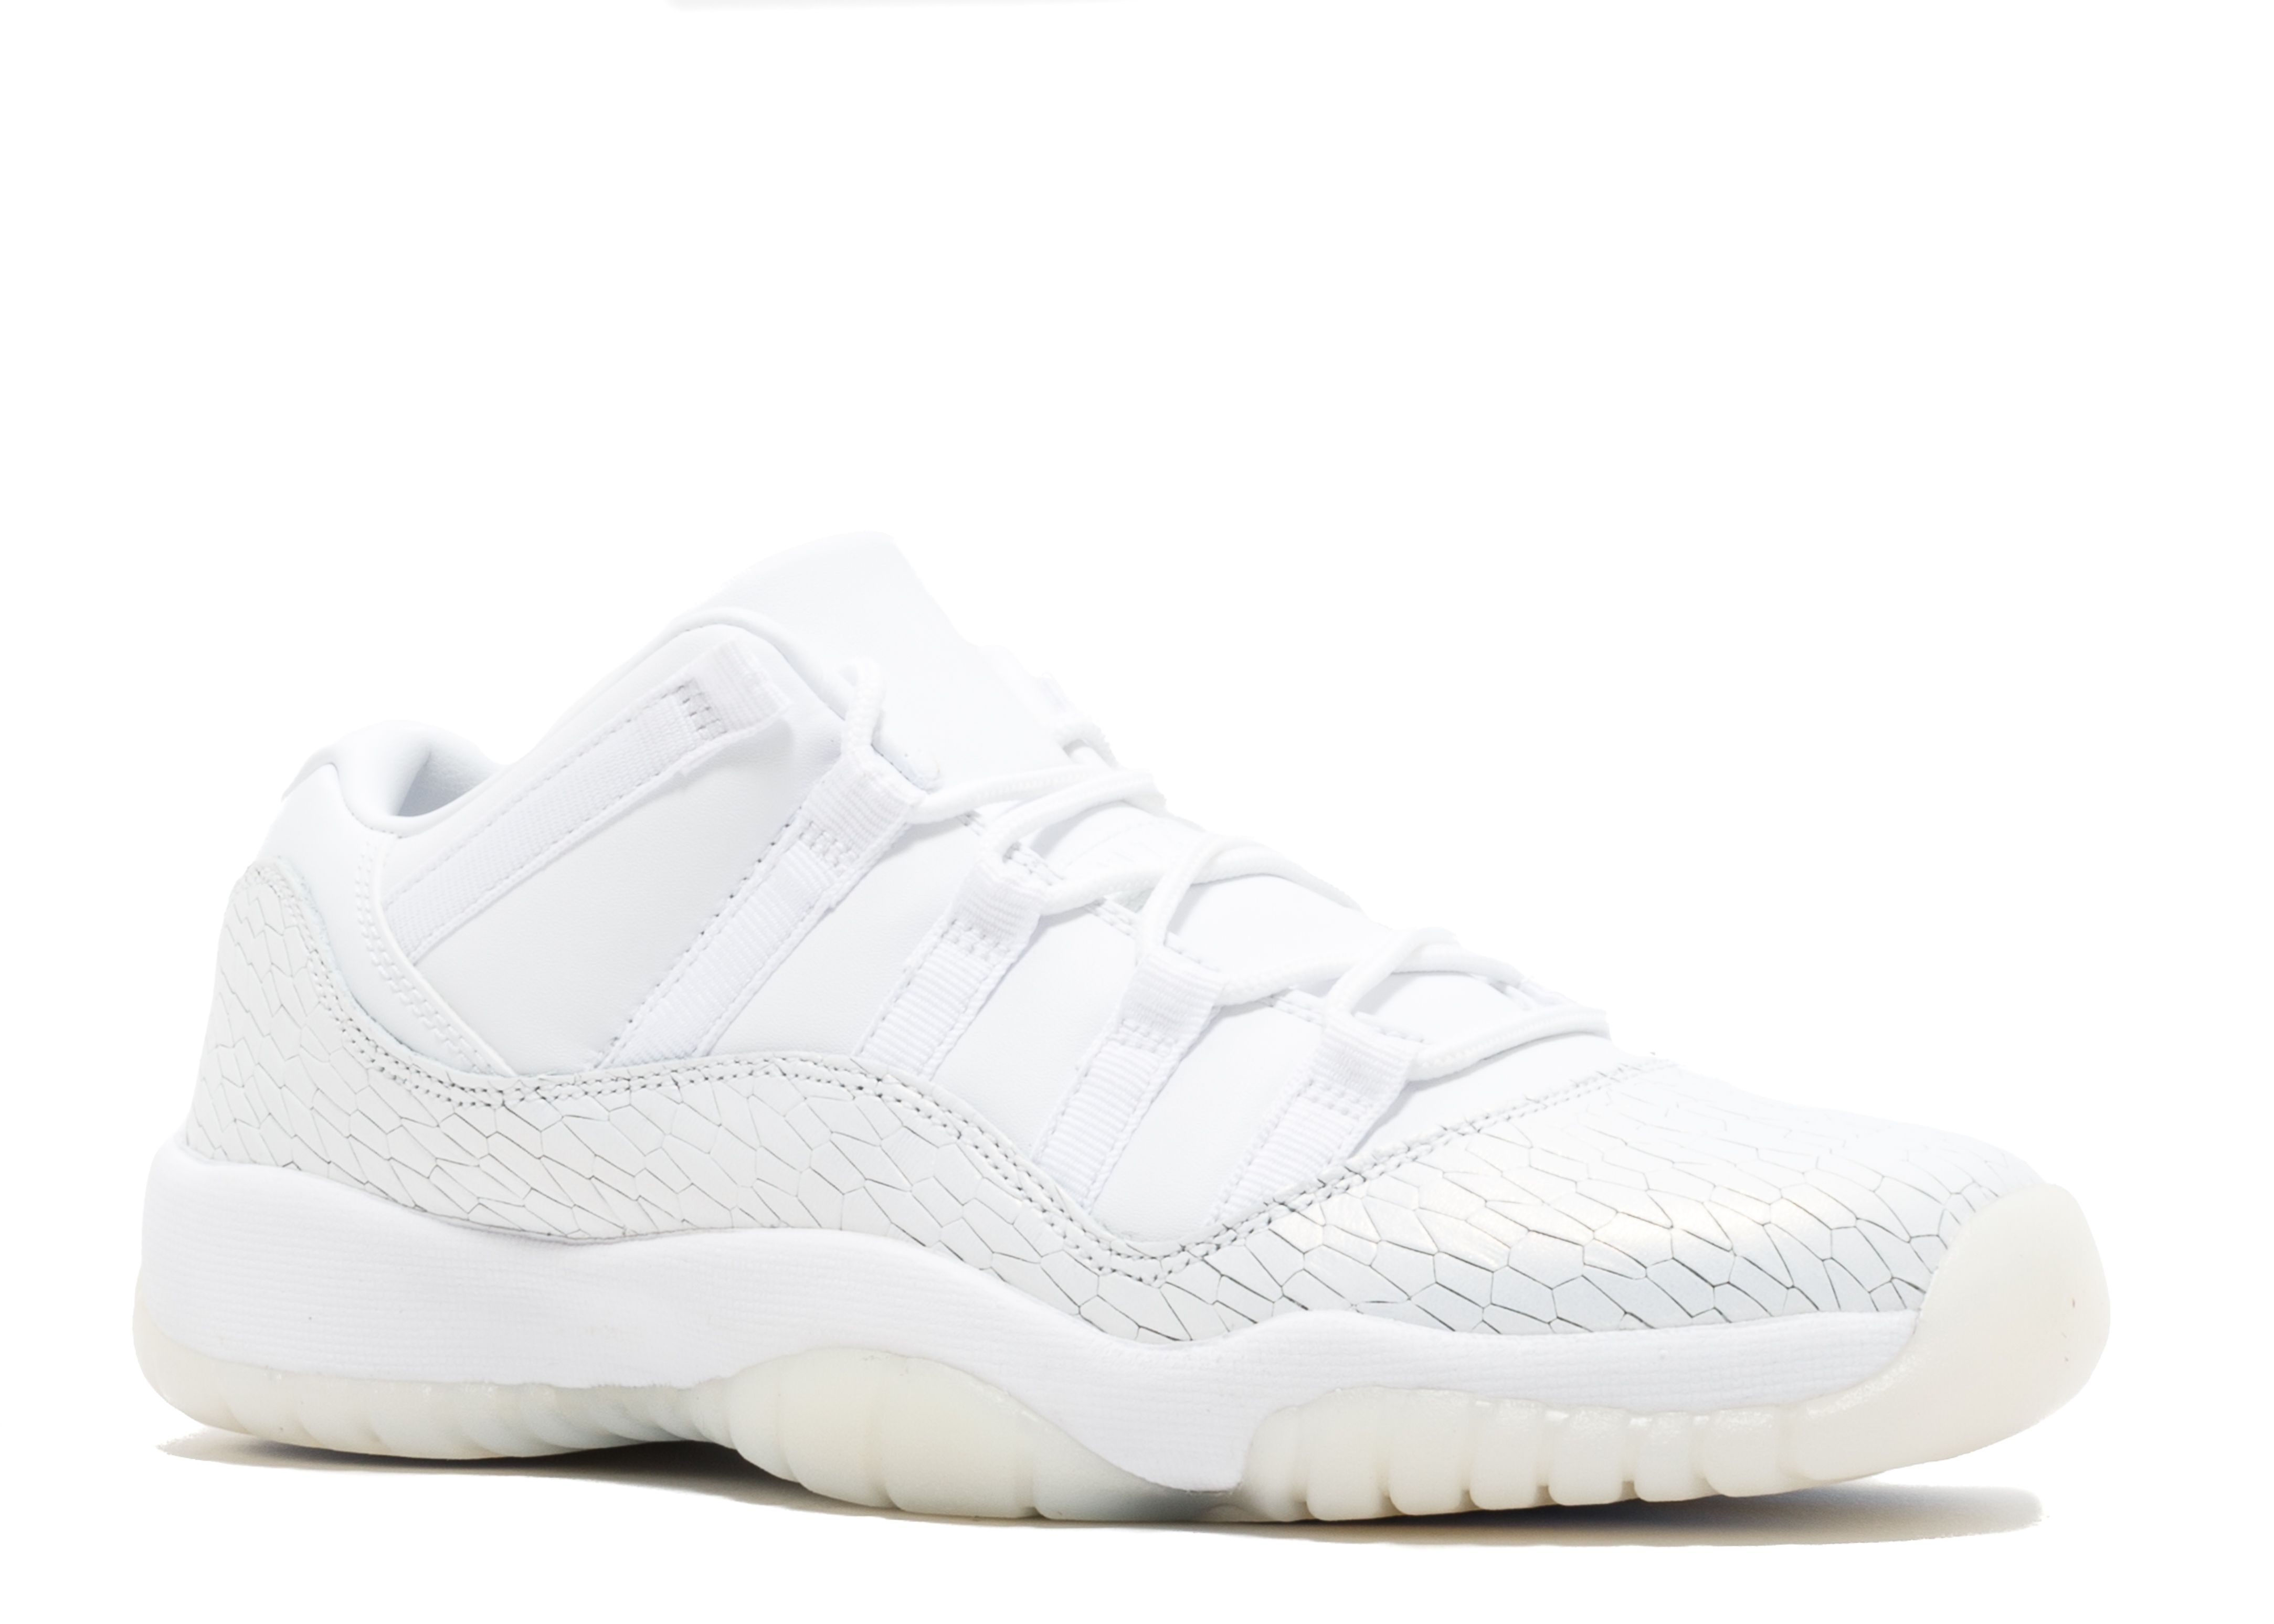 frost white 11s